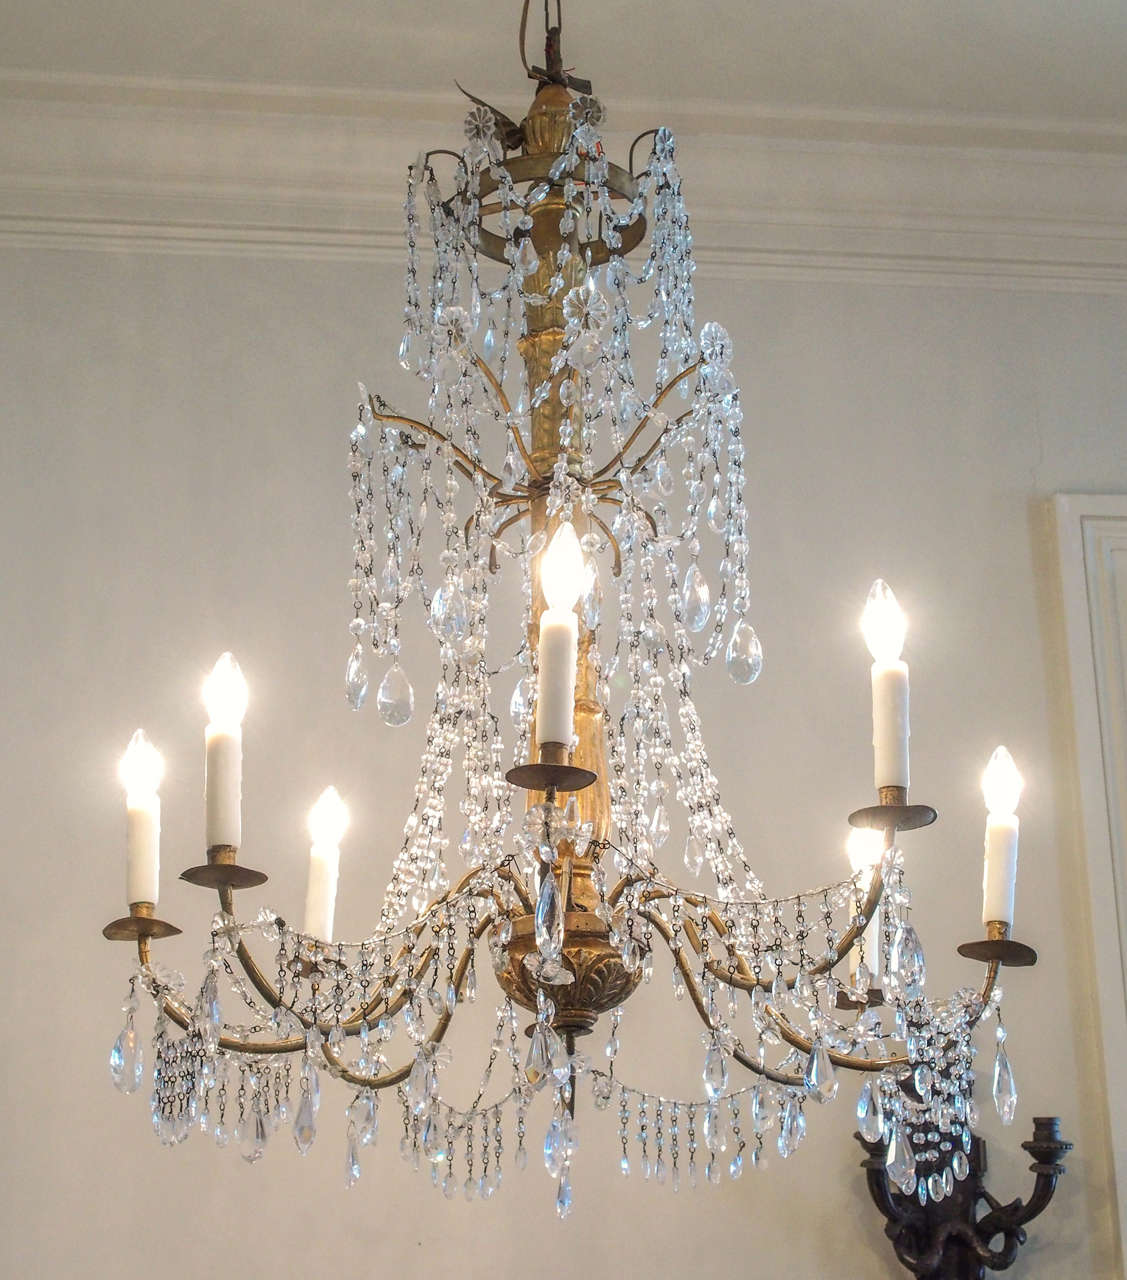 An elegant rendition of the Genovese chandelier, heavily festooned with swags of petite crystals, in three tiers, the bottom tier supporting the electrified arms. The center support of gilded wood ornamented with elongated leaves.